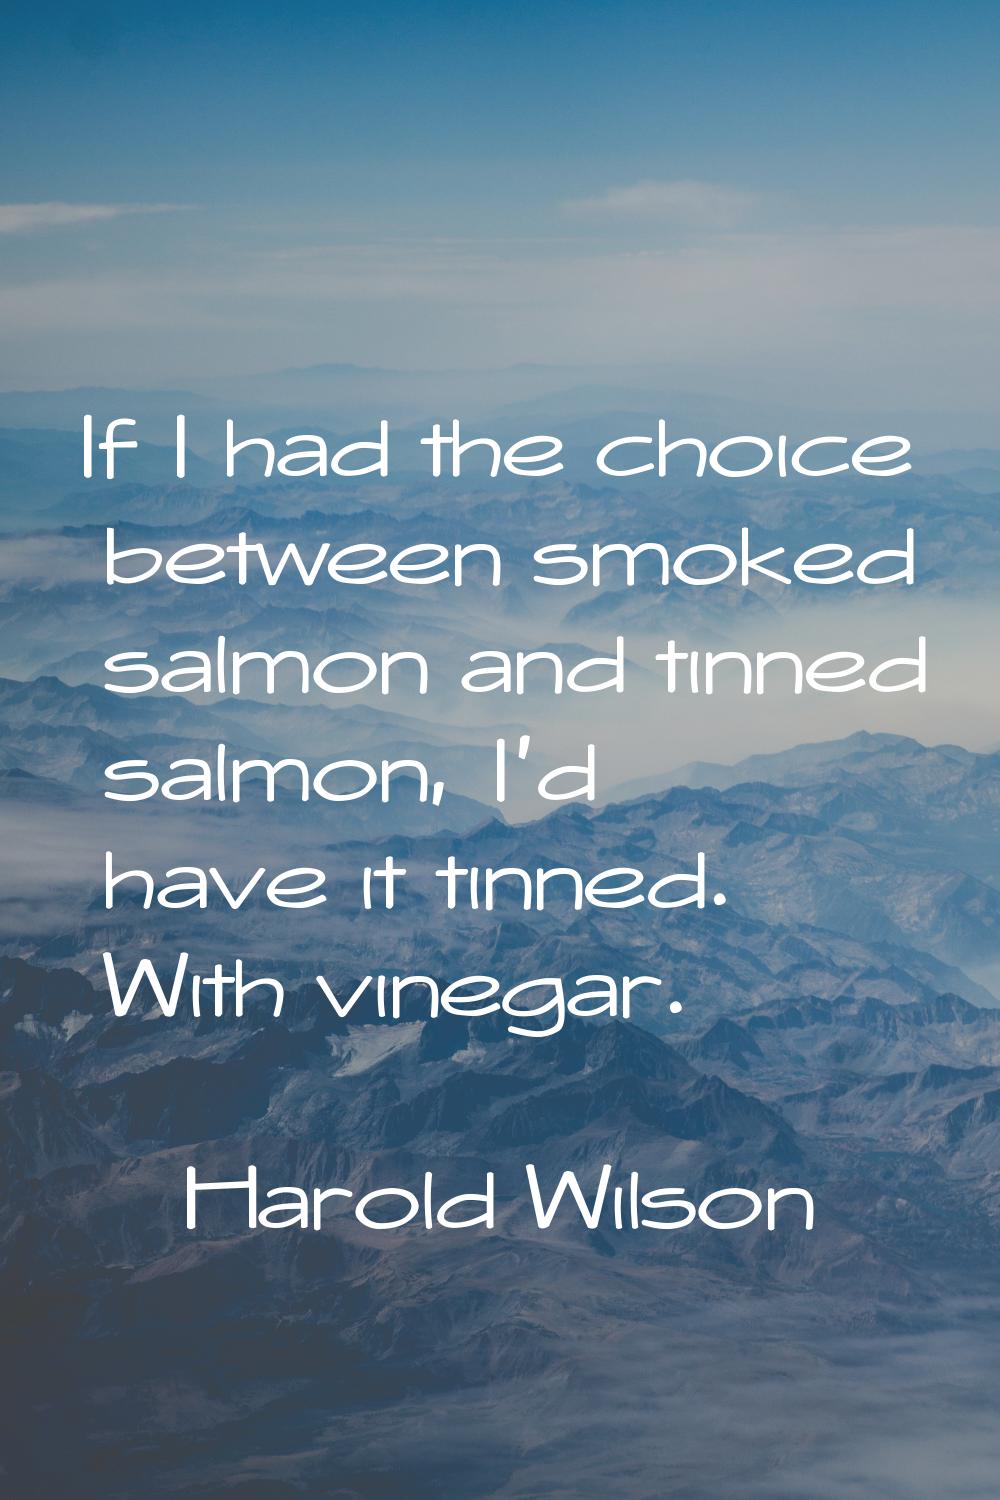 If I had the choice between smoked salmon and tinned salmon, I'd have it tinned. With vinegar.